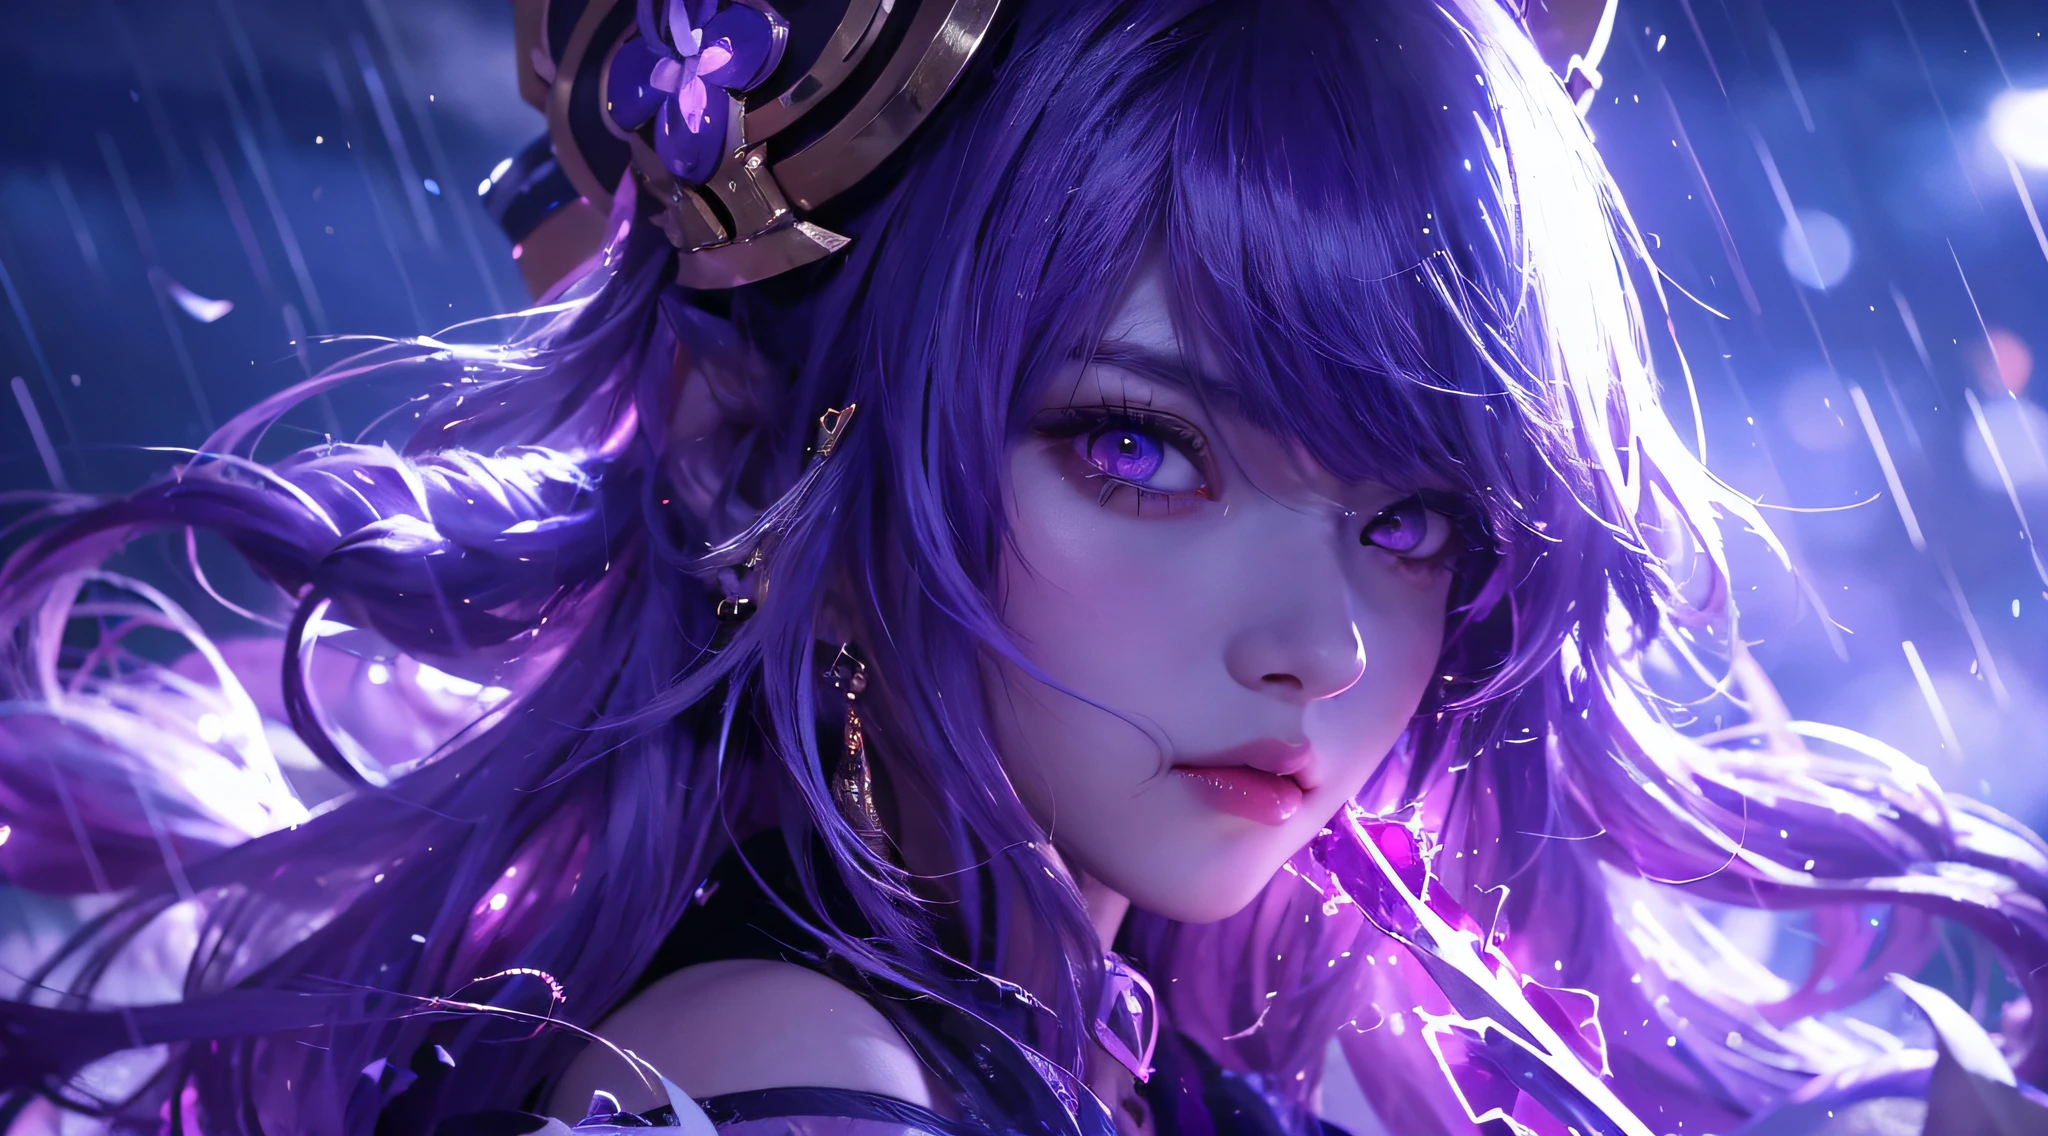 anime girl with purple hair and a crown on her head, detailed digital anime art, extremely detailed artgerm, anime art wallpaper 4k, anime art wallpaper 4 k, anime style 4 k, anime wallpaper 4 k, anime art wallpaper 8 k, anime wallpaper 4k, 4k anime wallpaper, portrait knights of zodiac girl, artgerm detailed